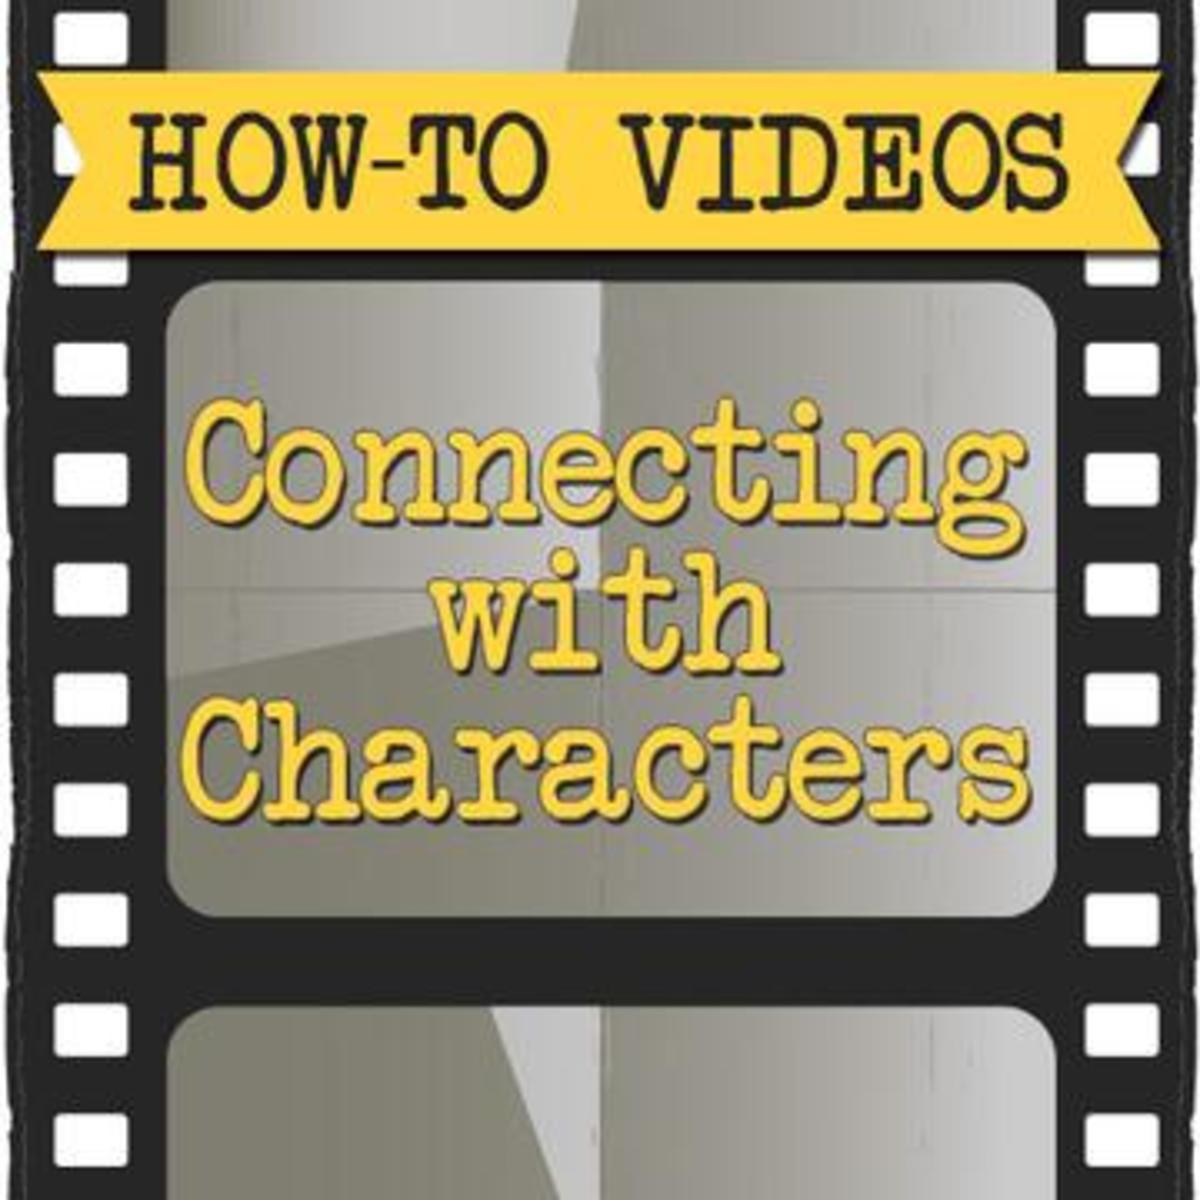 ws_howtovideos-500-connectingcharacters_360x